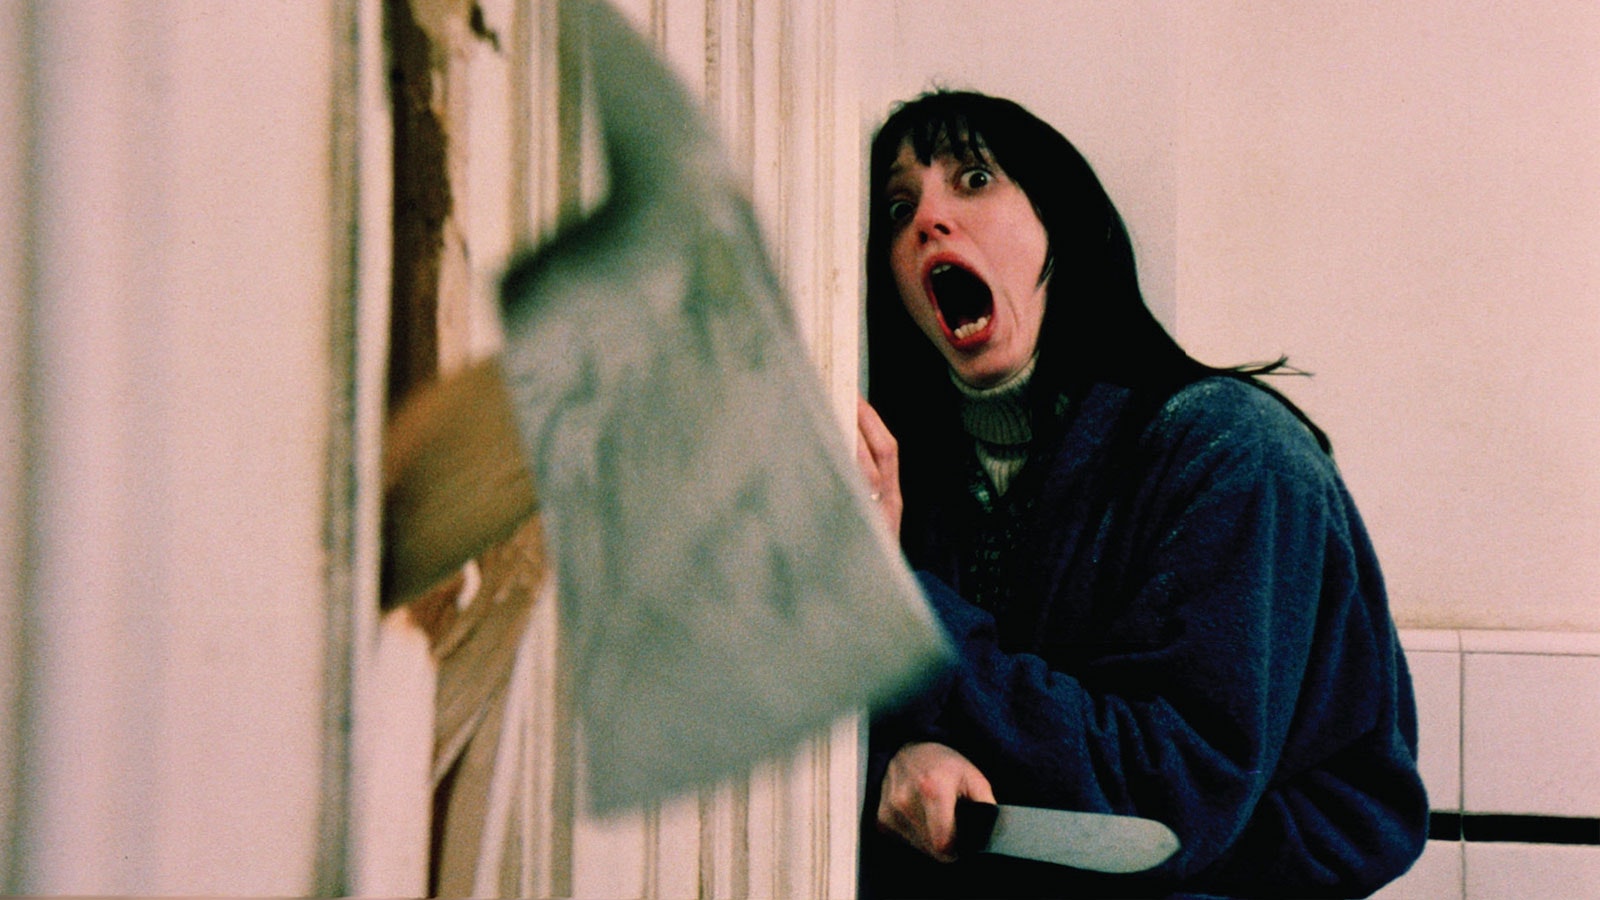 The 20 best slasher movies of all time